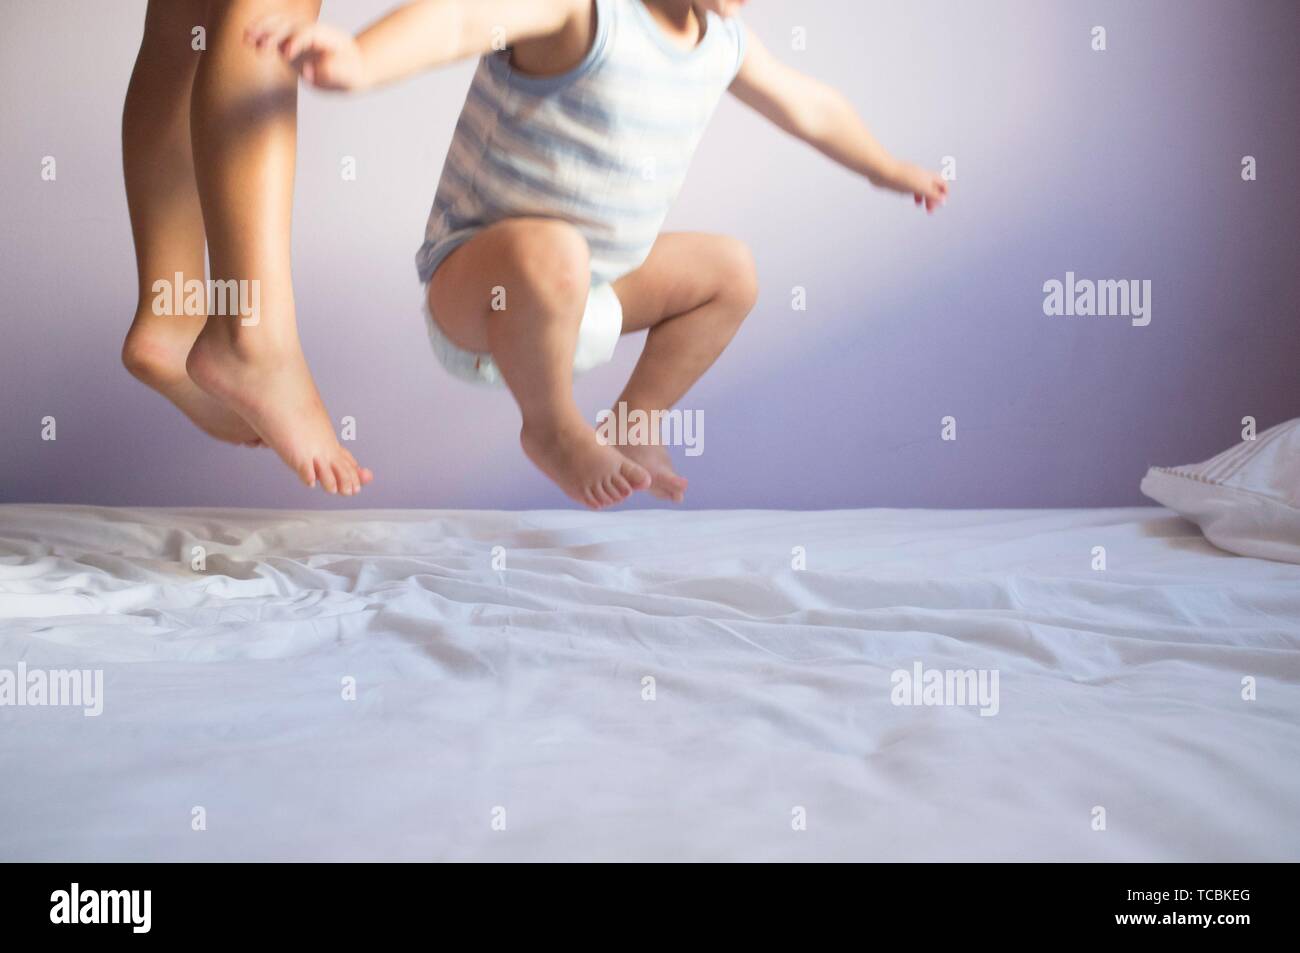 Children jumping on bed. Motion blurred. Stock Photo